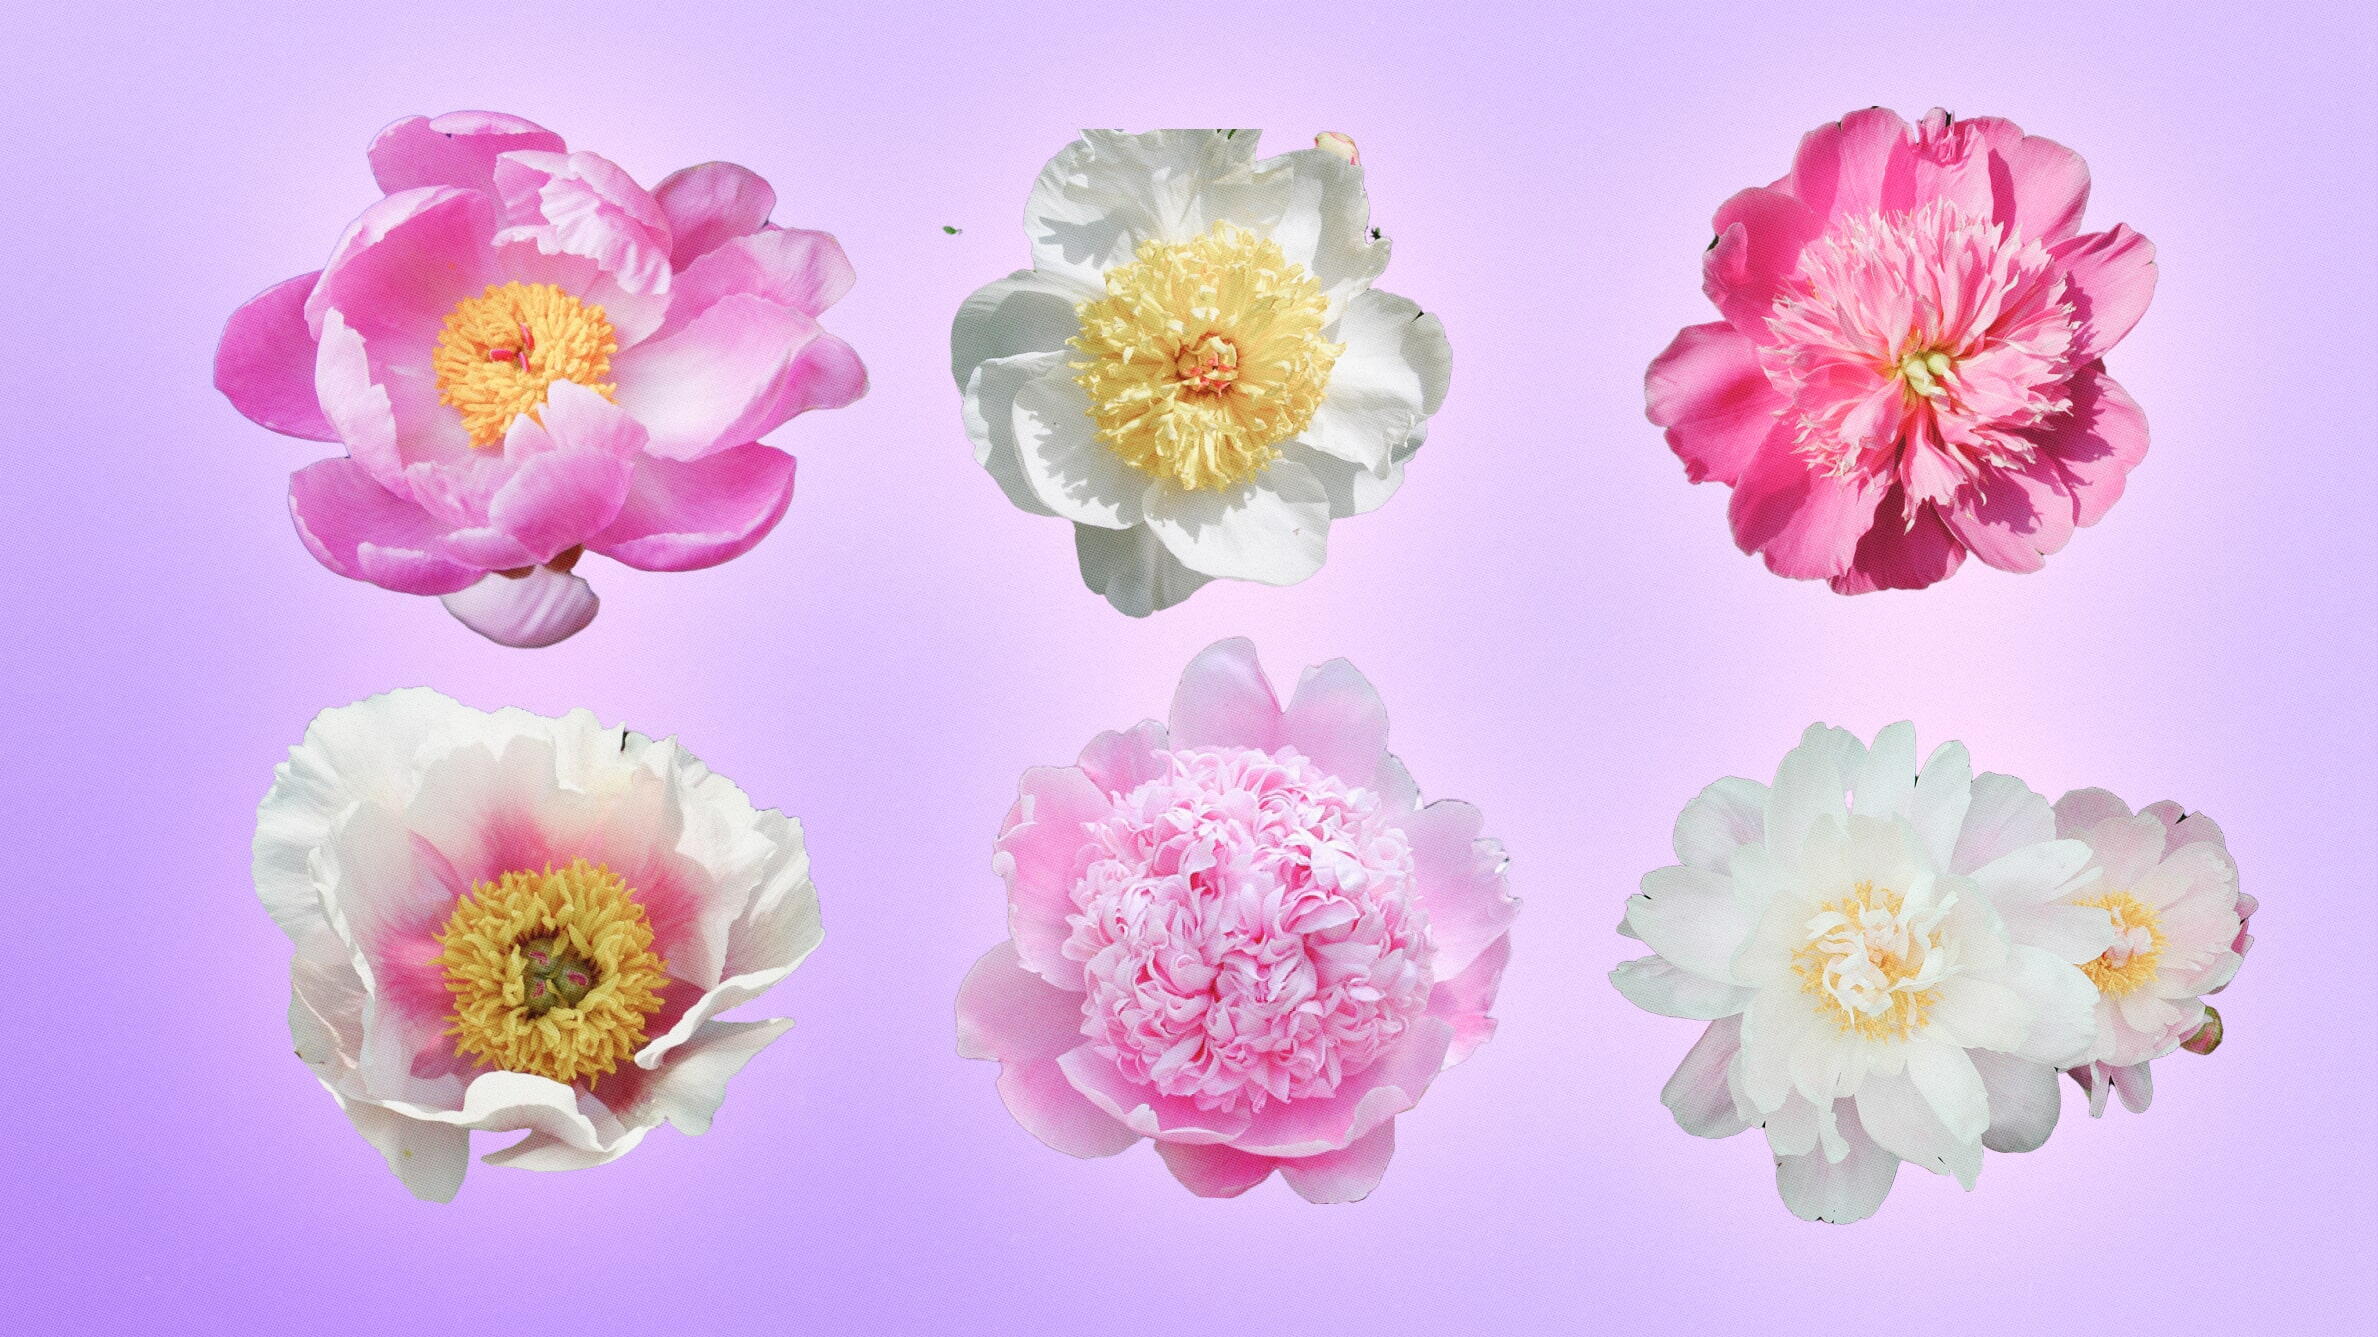 Different types of peonies in season